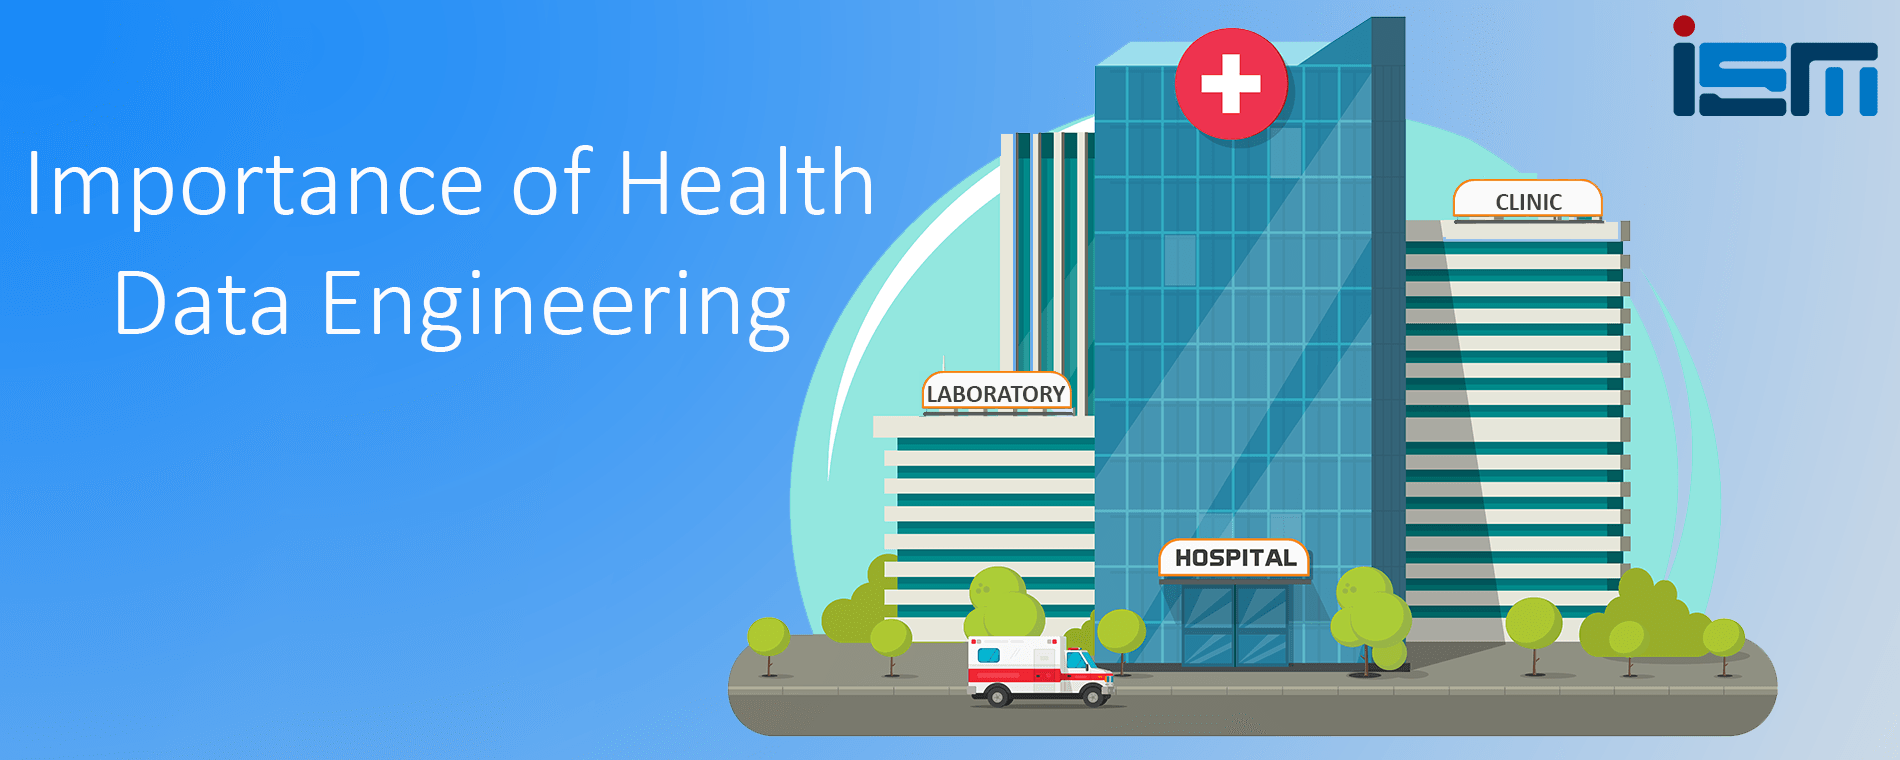 Importance of Health
Data Engineering

  
     

HOSPITAL

=a

0

—_
=r